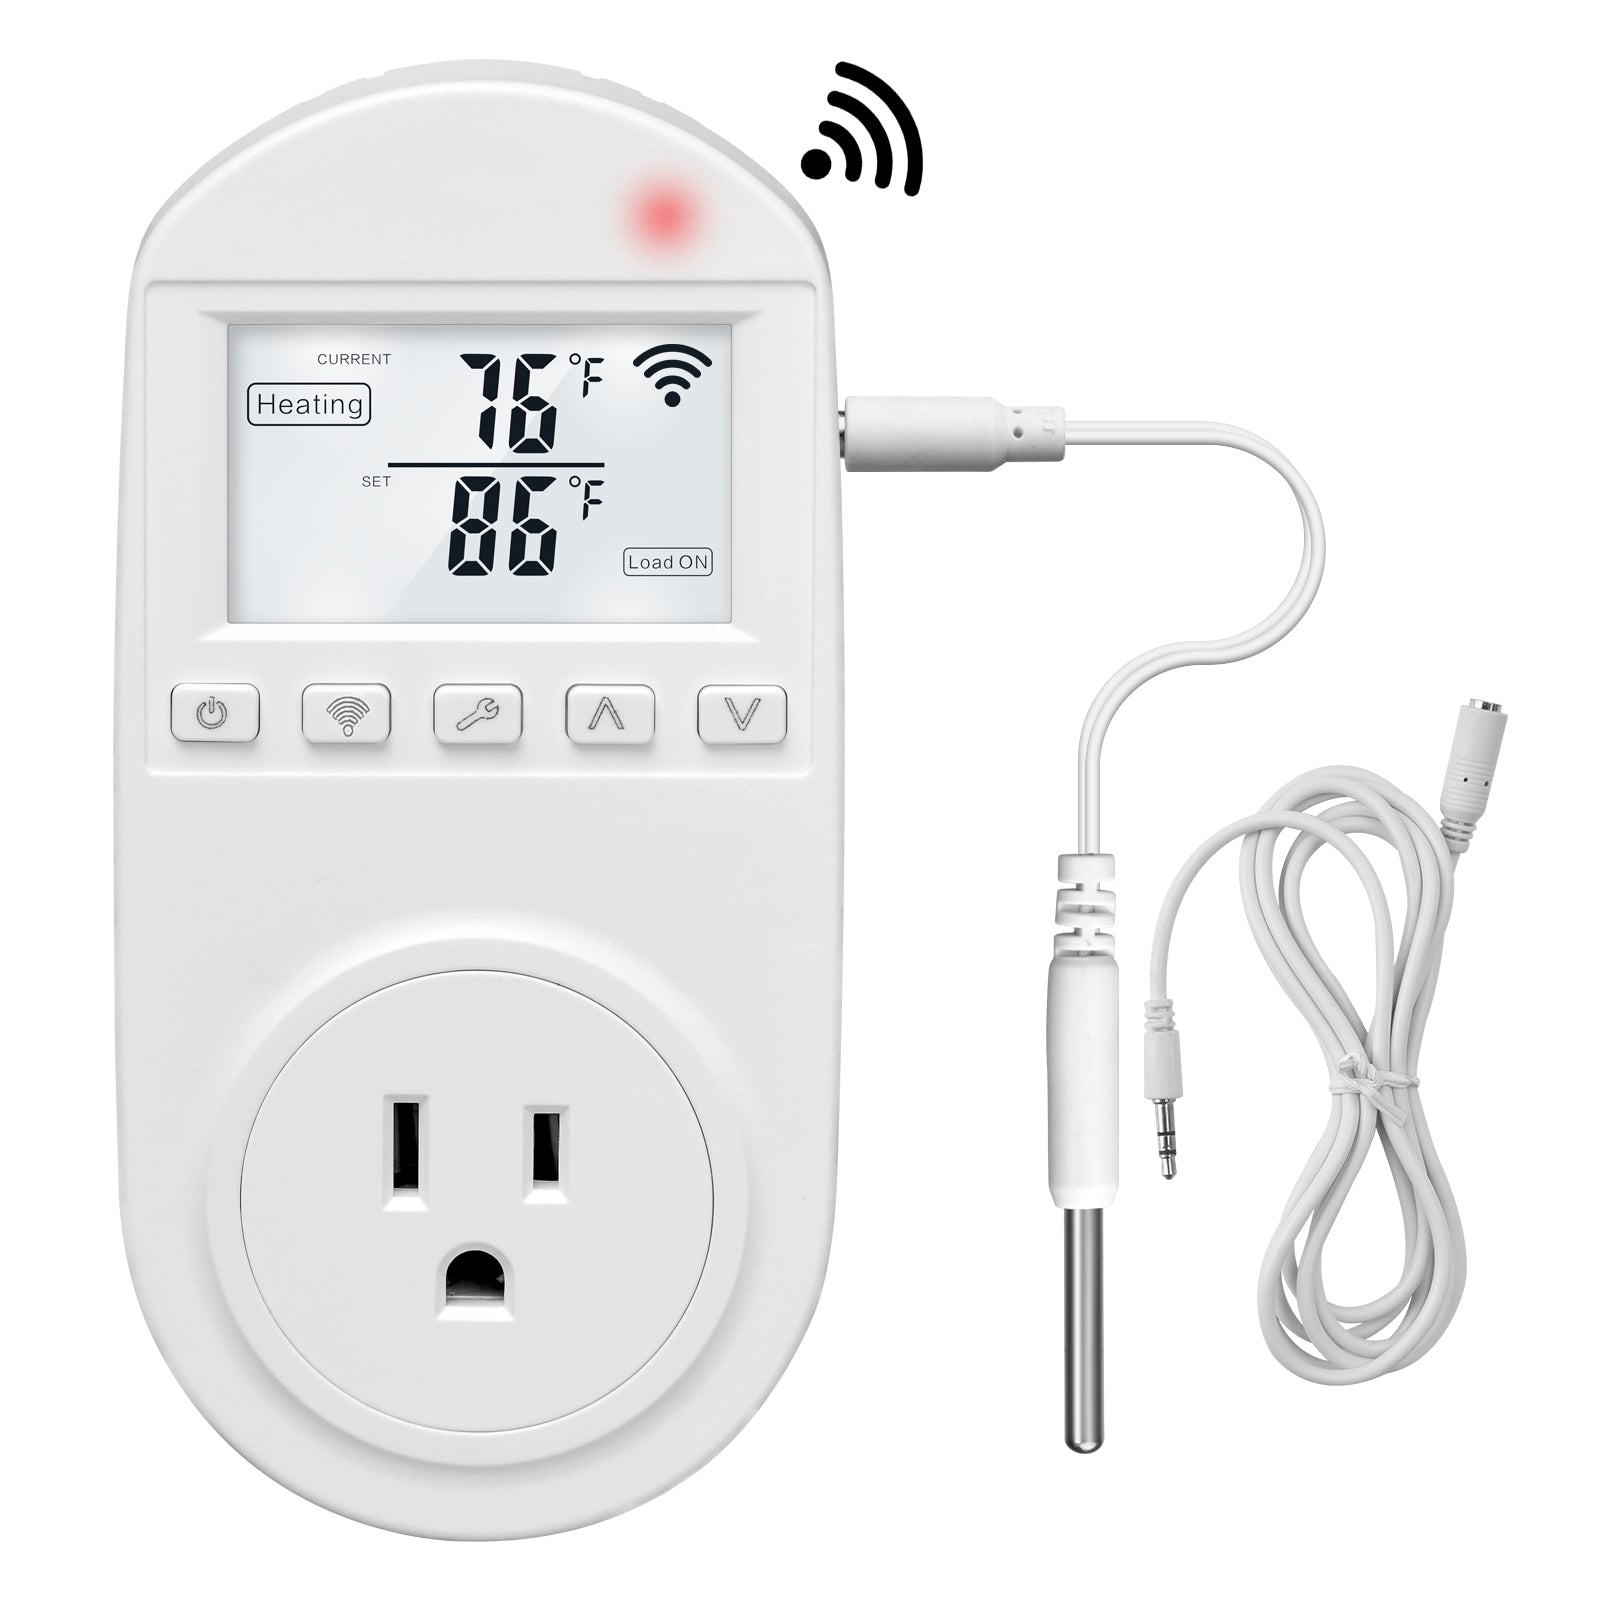 New Generation! Briidea Smart WiFi Heating Cooling Temperature Controlled Outlet, 110V 16A